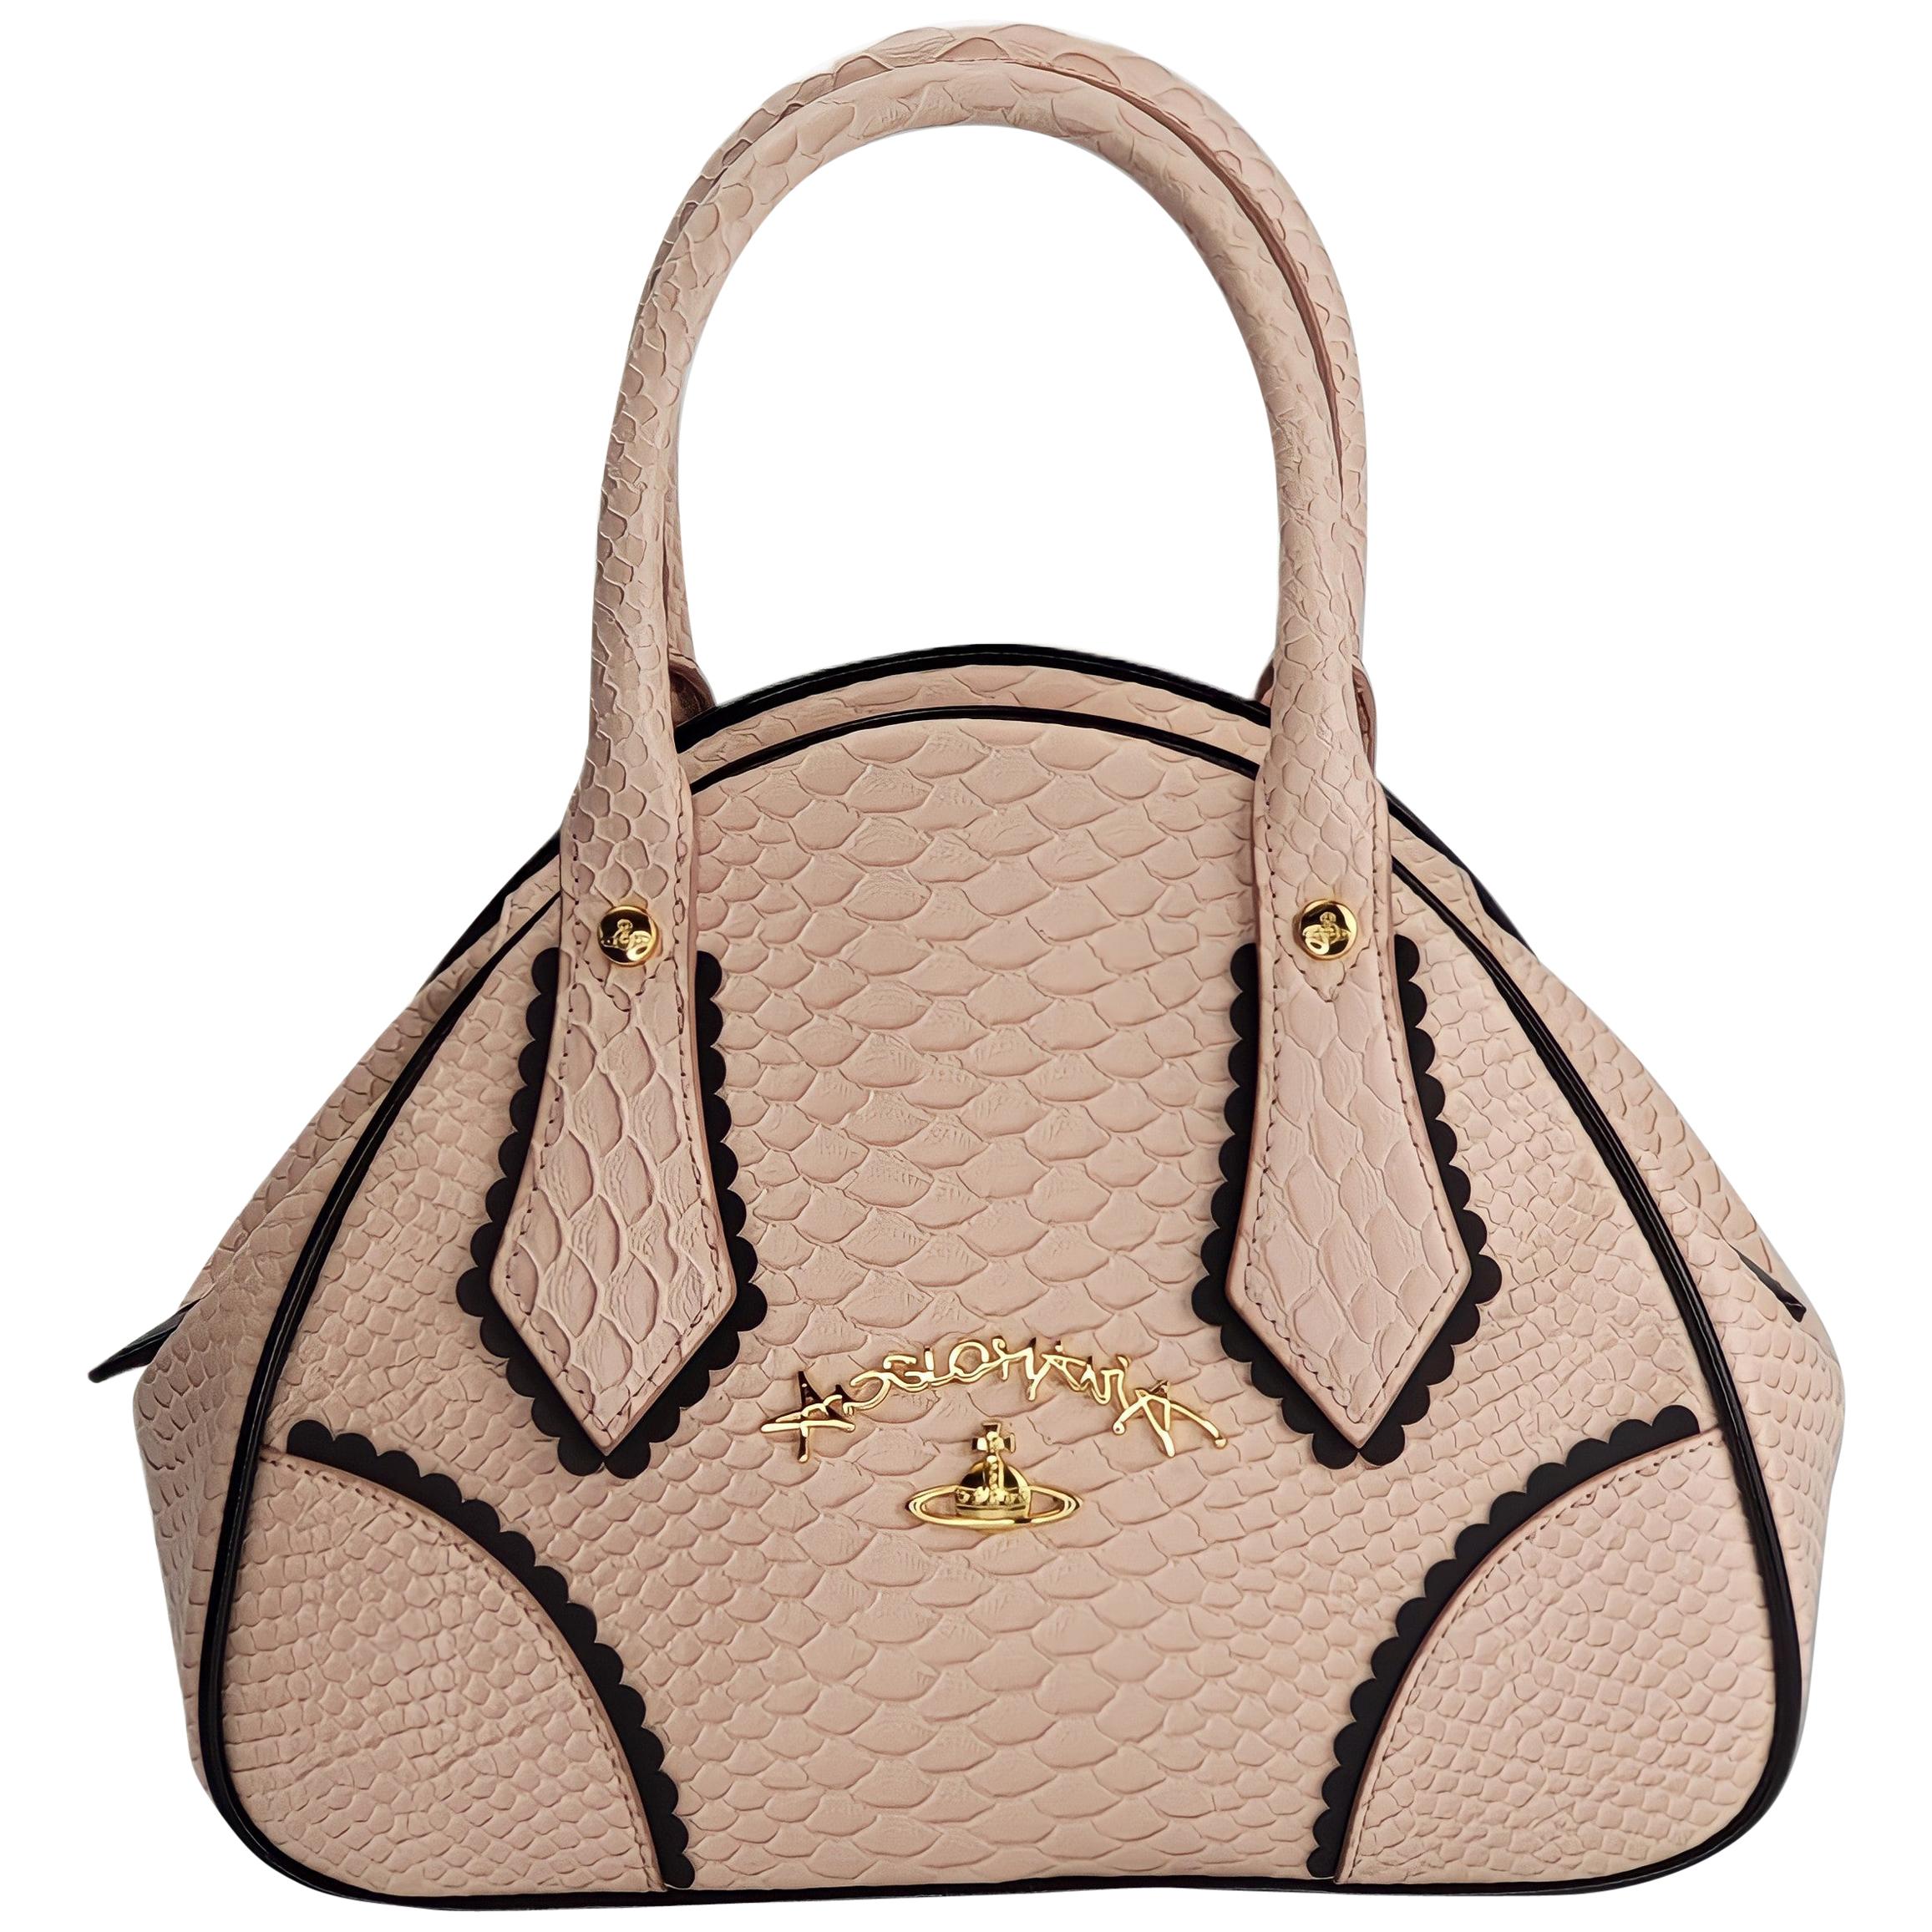 Vivienne Westwood Anglomania Women's Frilly Snake Heart Bag - Viola